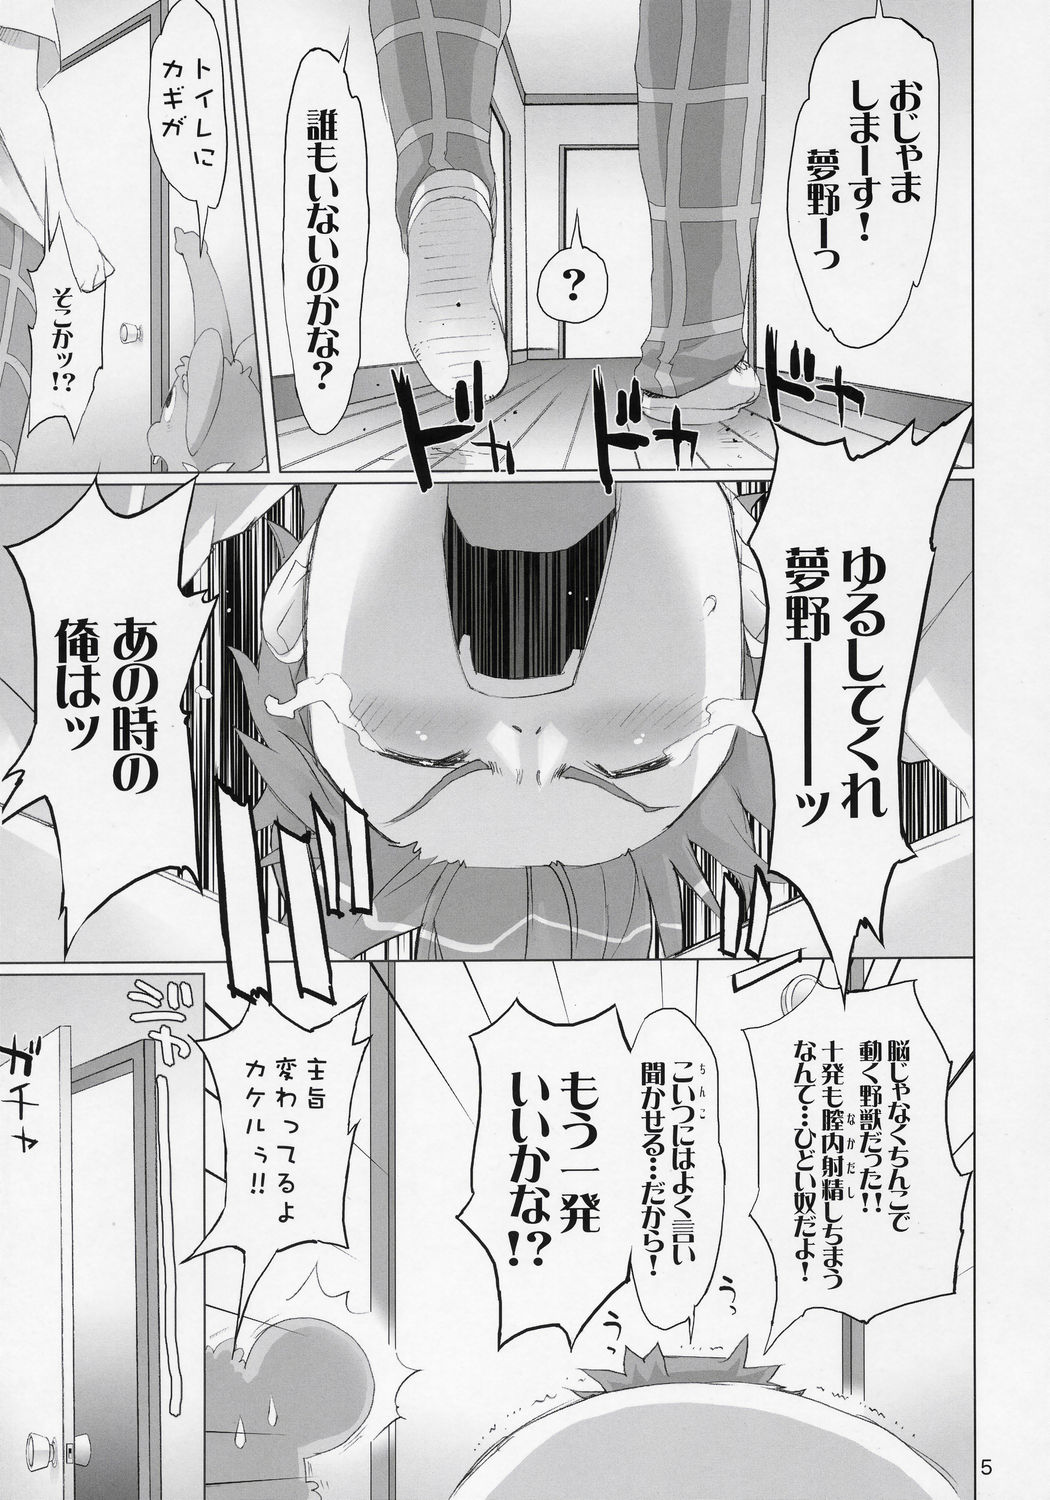 (SC32) [Digital Accel Works (INAZUMA)] THUNDER DOME (Onegai My Melody) page 5 full